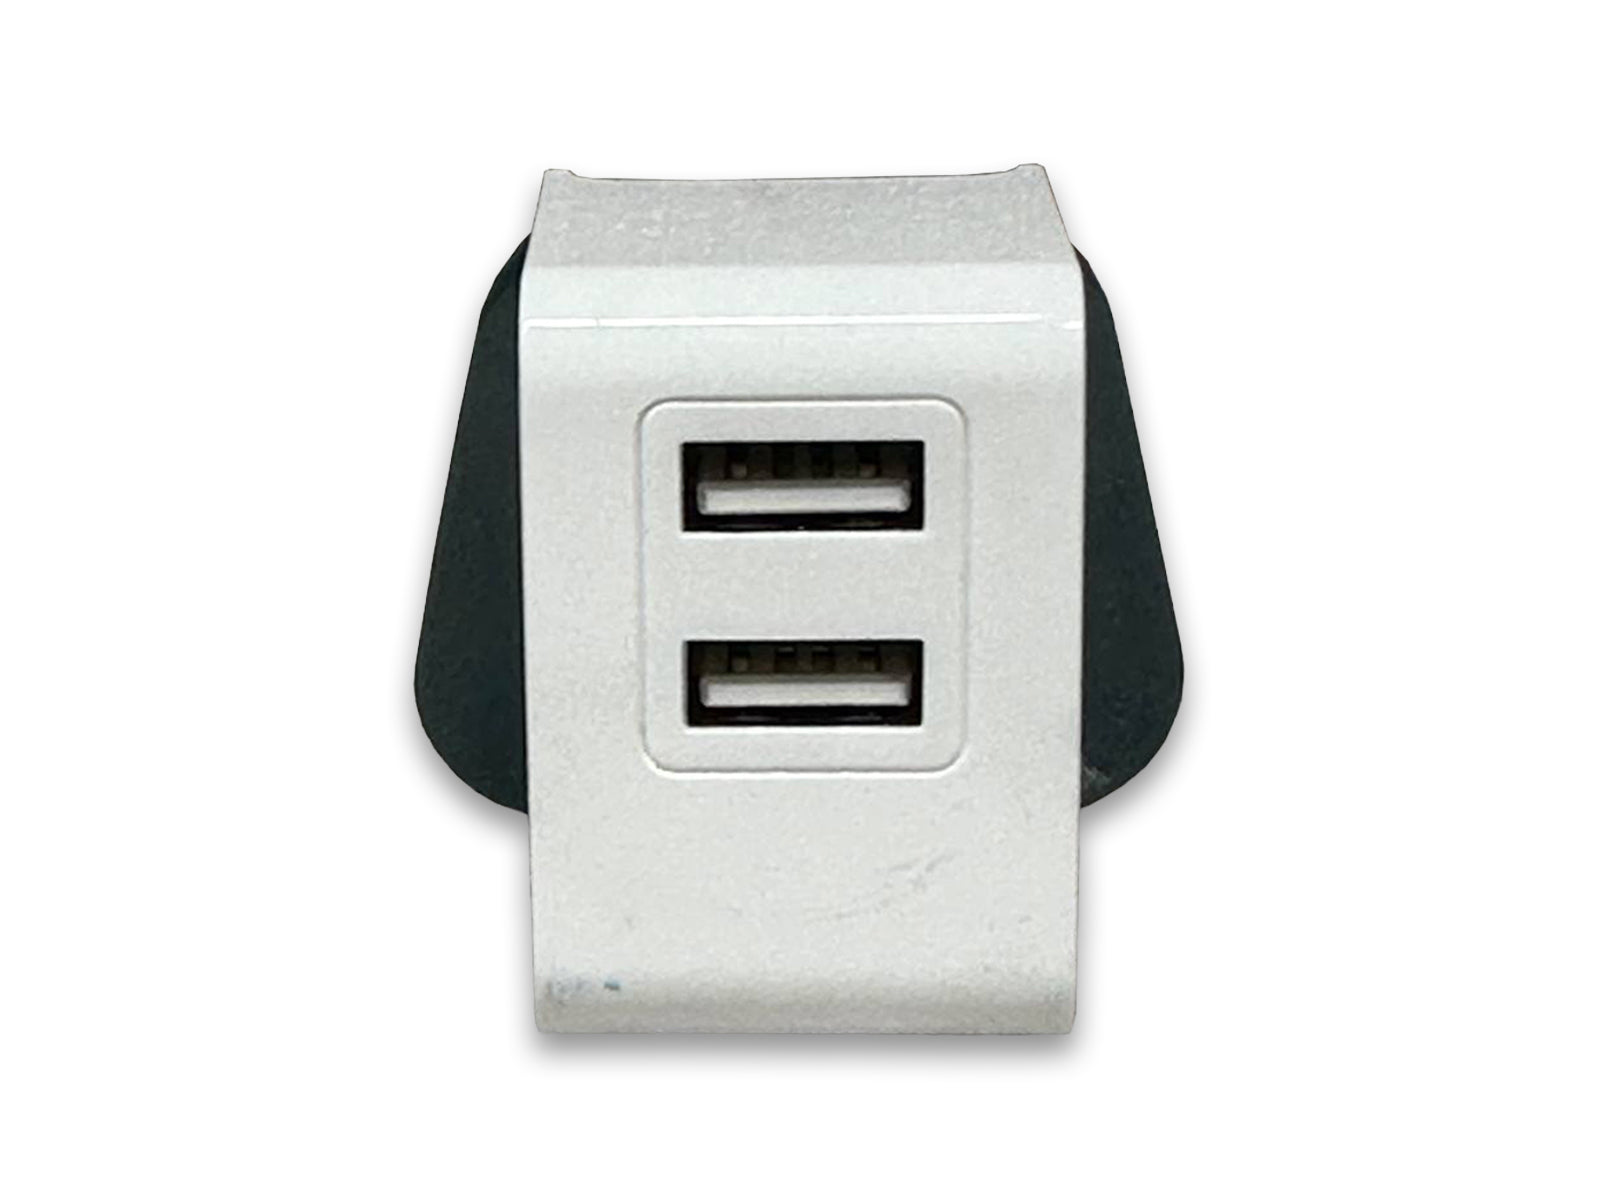 Image shows port view of wall charger on white background